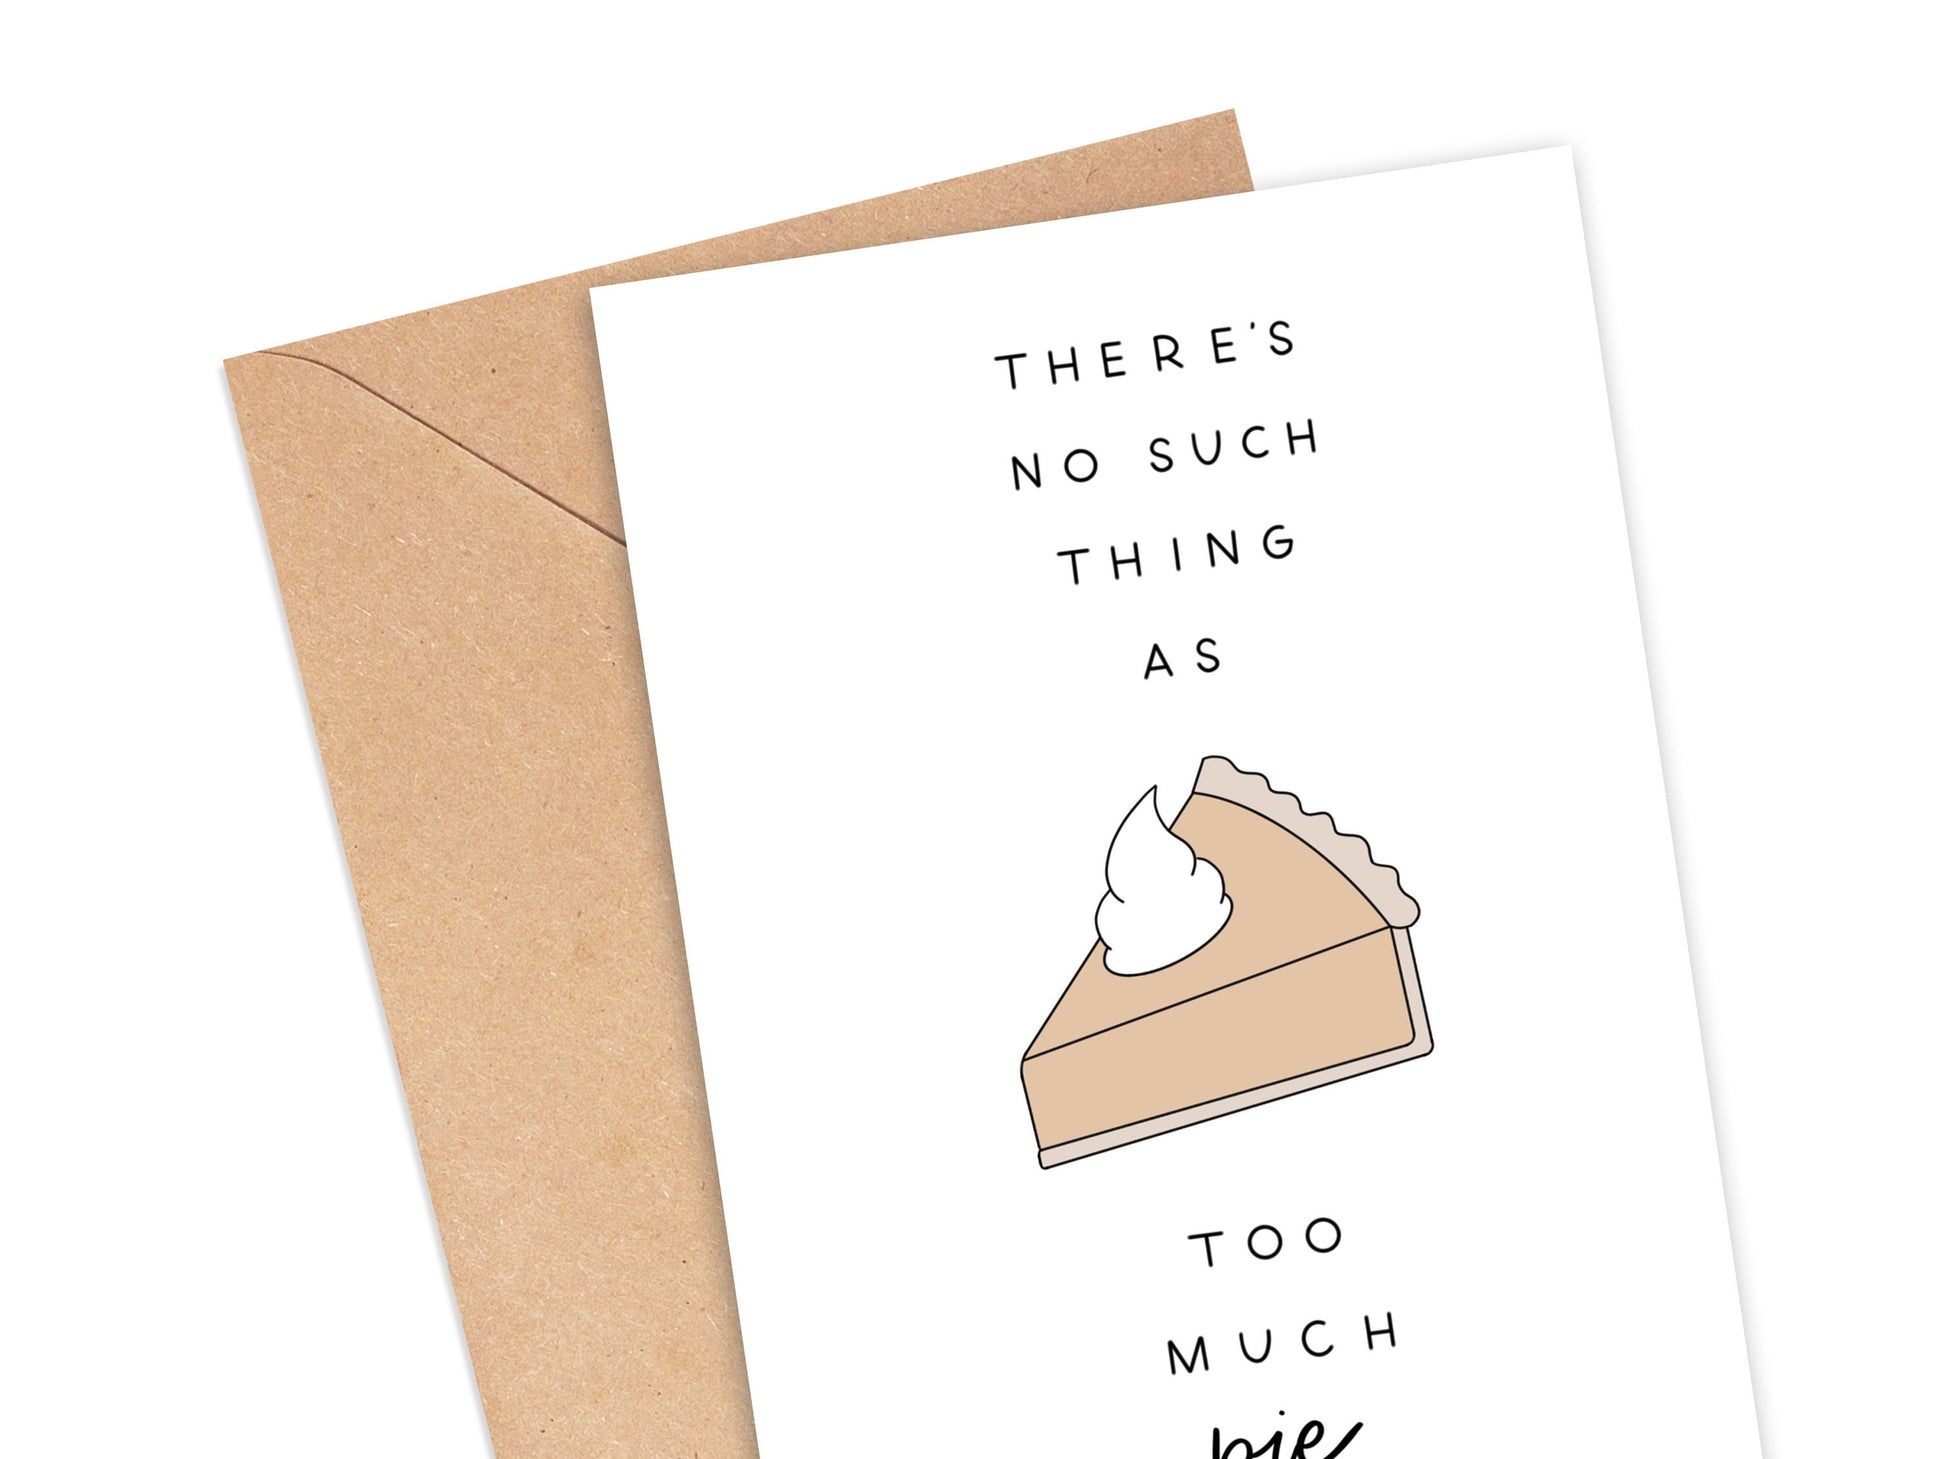 There's No Such Thing As Too Much Pie Card Simply Happy Cards